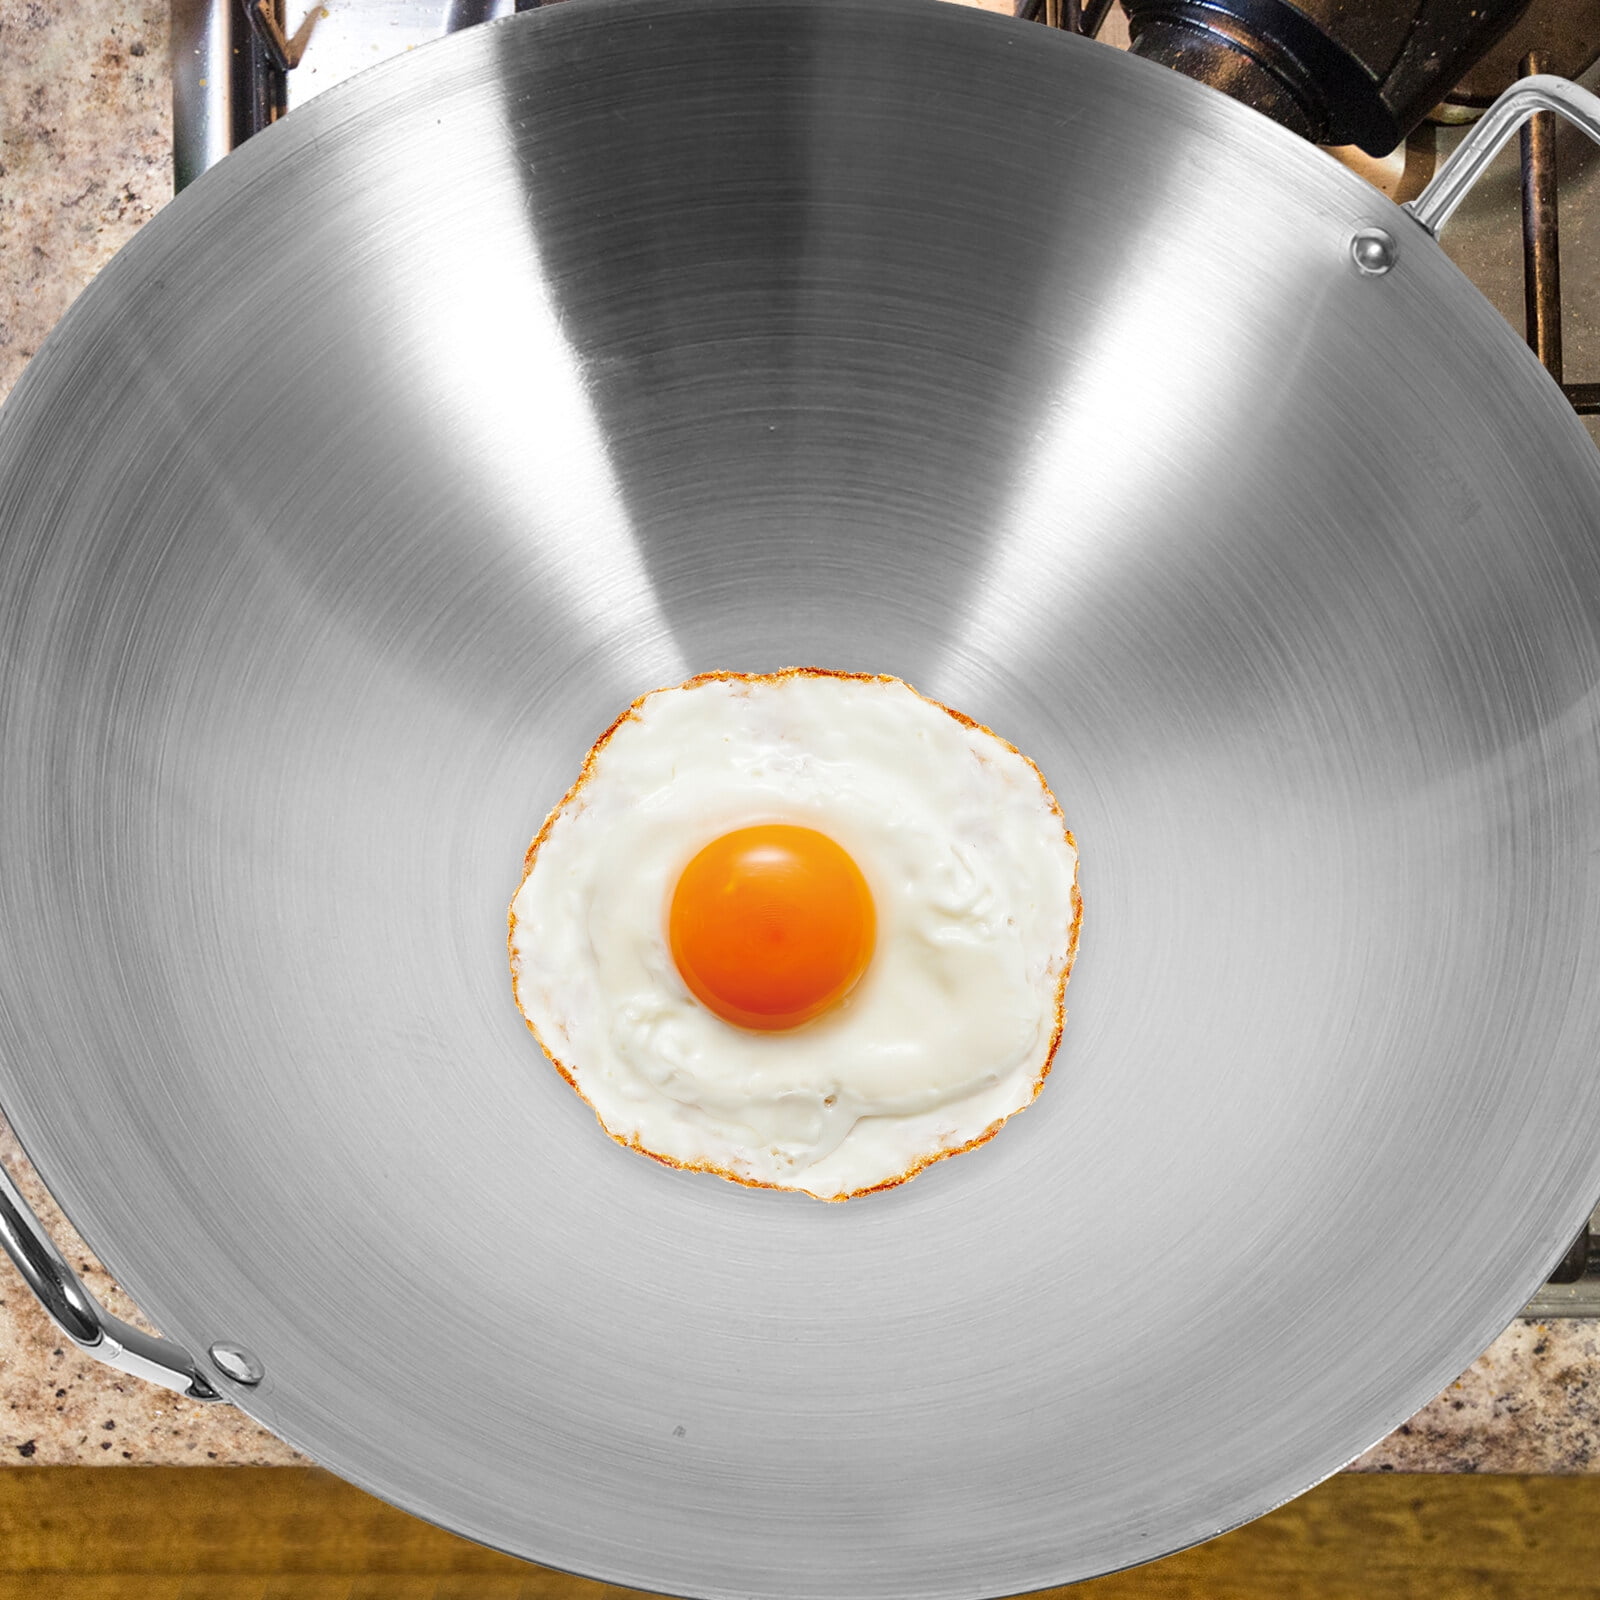  BERTY·PUYI Stainless Steel Wok Chinese Uncoated Pan Extra Large  Thickened Double Ears Round Bottom Frying Pan Commercial Canteen Big Wok-36cm  : לבית ולמטבח